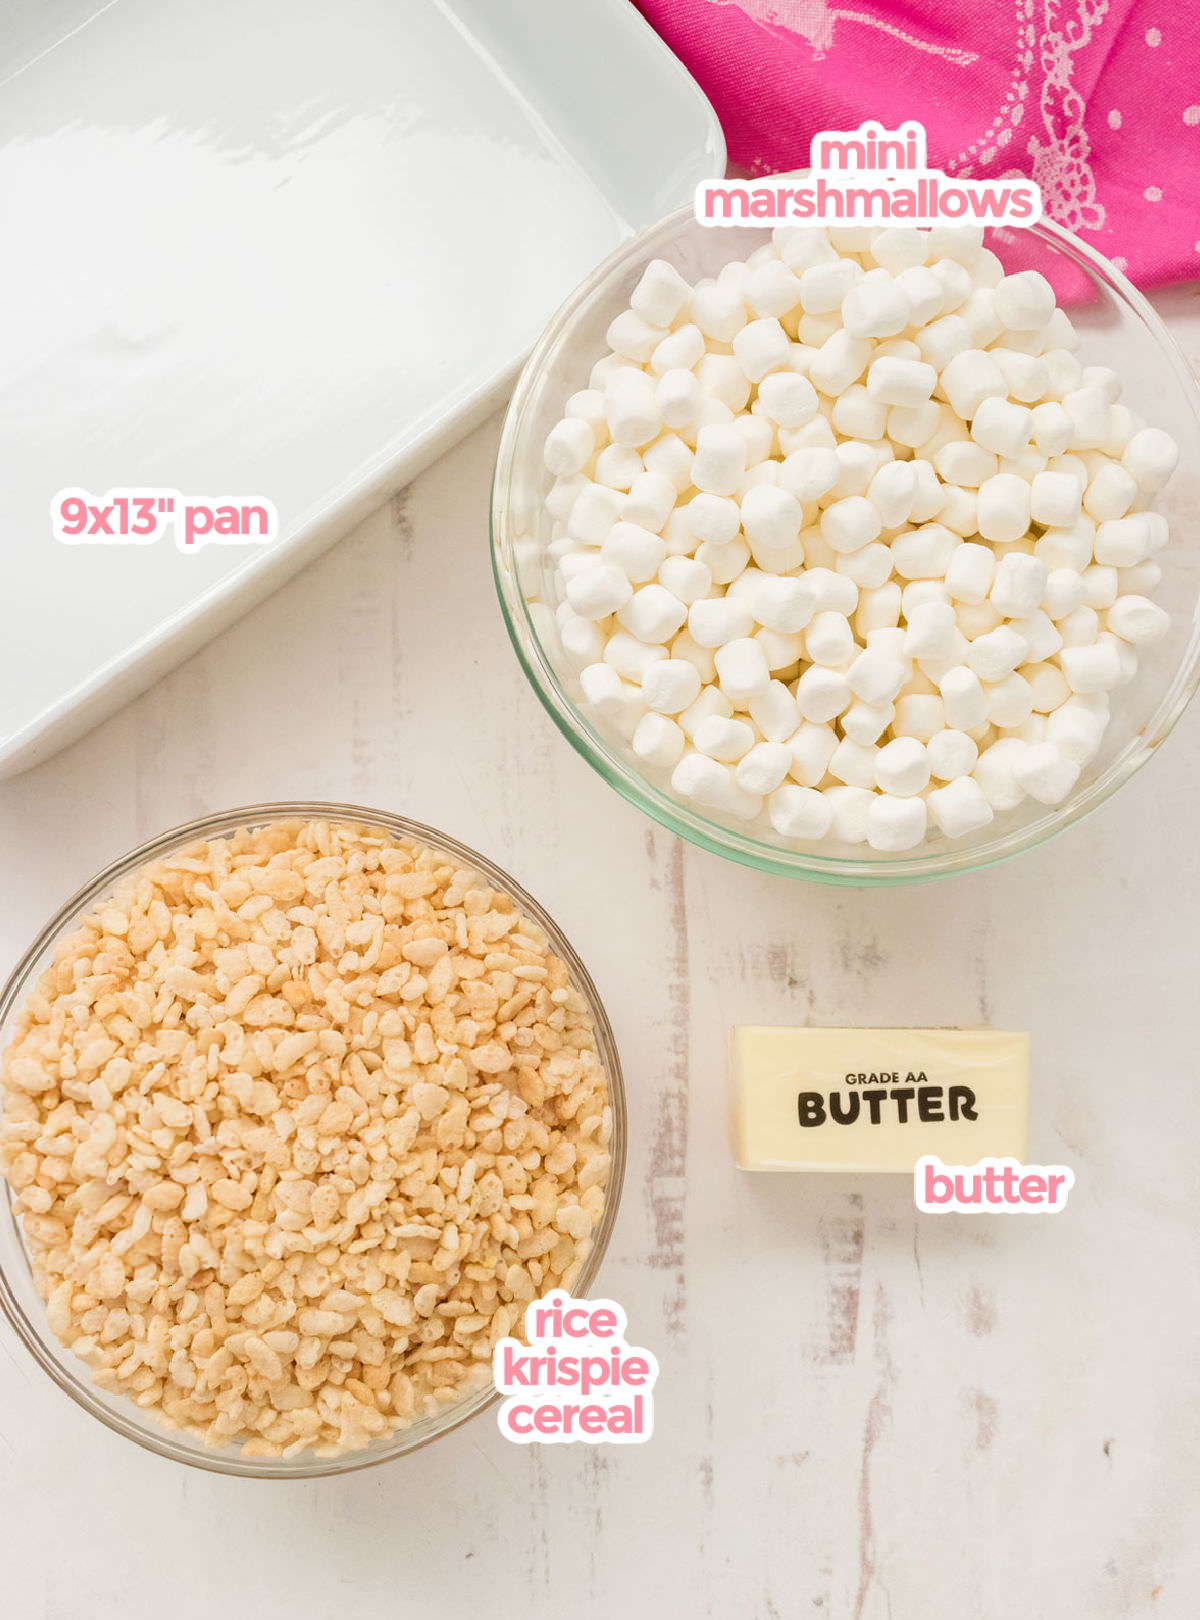 All the ingredients you will need to make Rice Krispie Treats including Mini Marshmallows, Rice Krispie Cereal, Butter and a 9x13" pan.